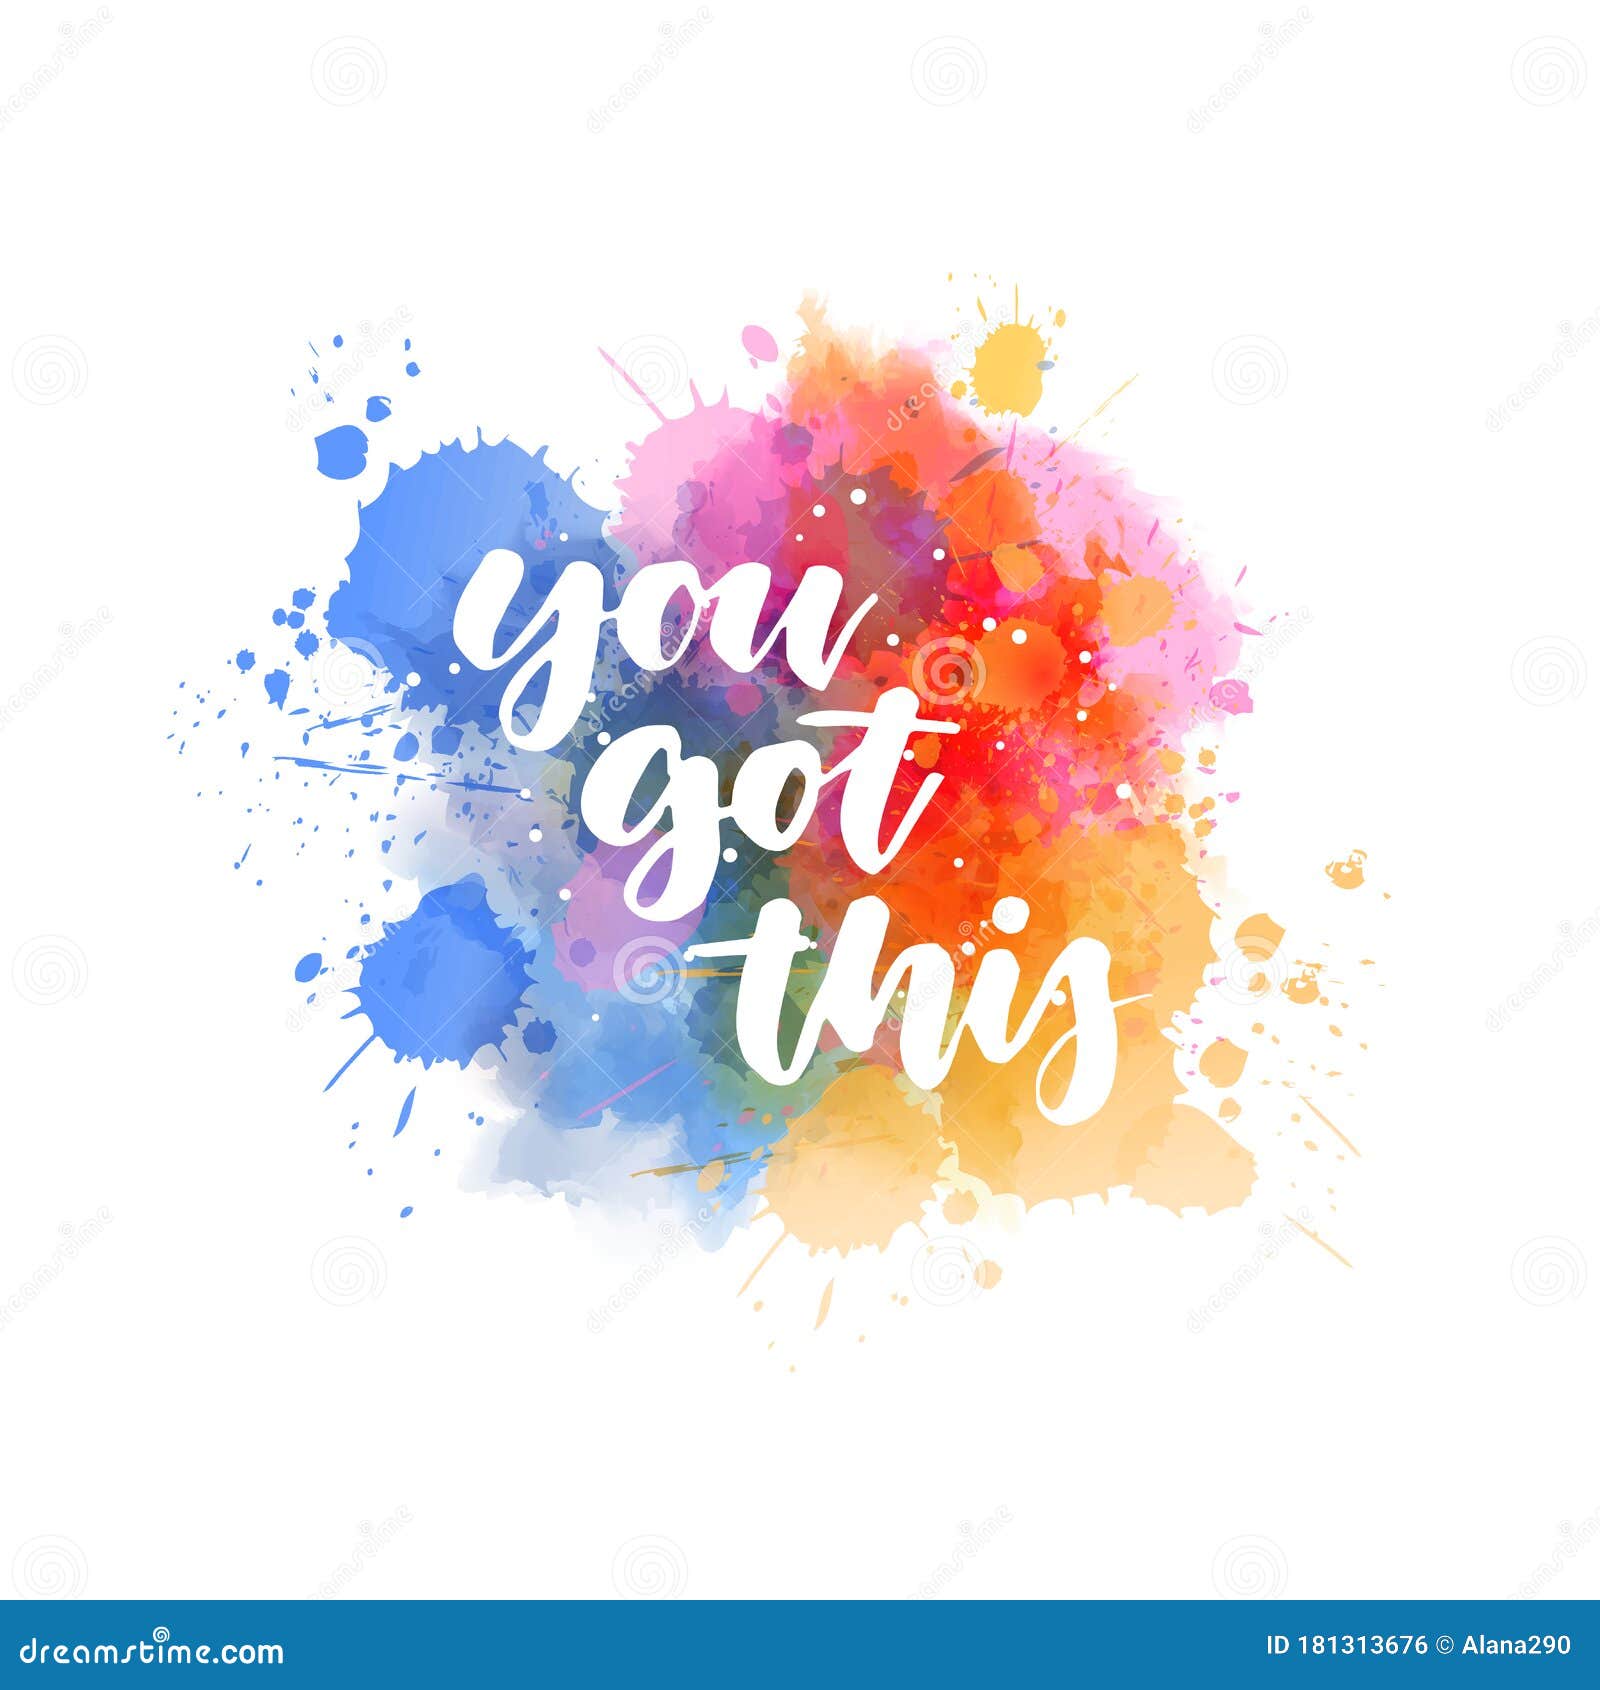 https://thumbs.dreamstime.com/z/you-got-handwritten-lettering-abstract-painted-watercolor-splash-blue-pink-colored-181313676.jpg